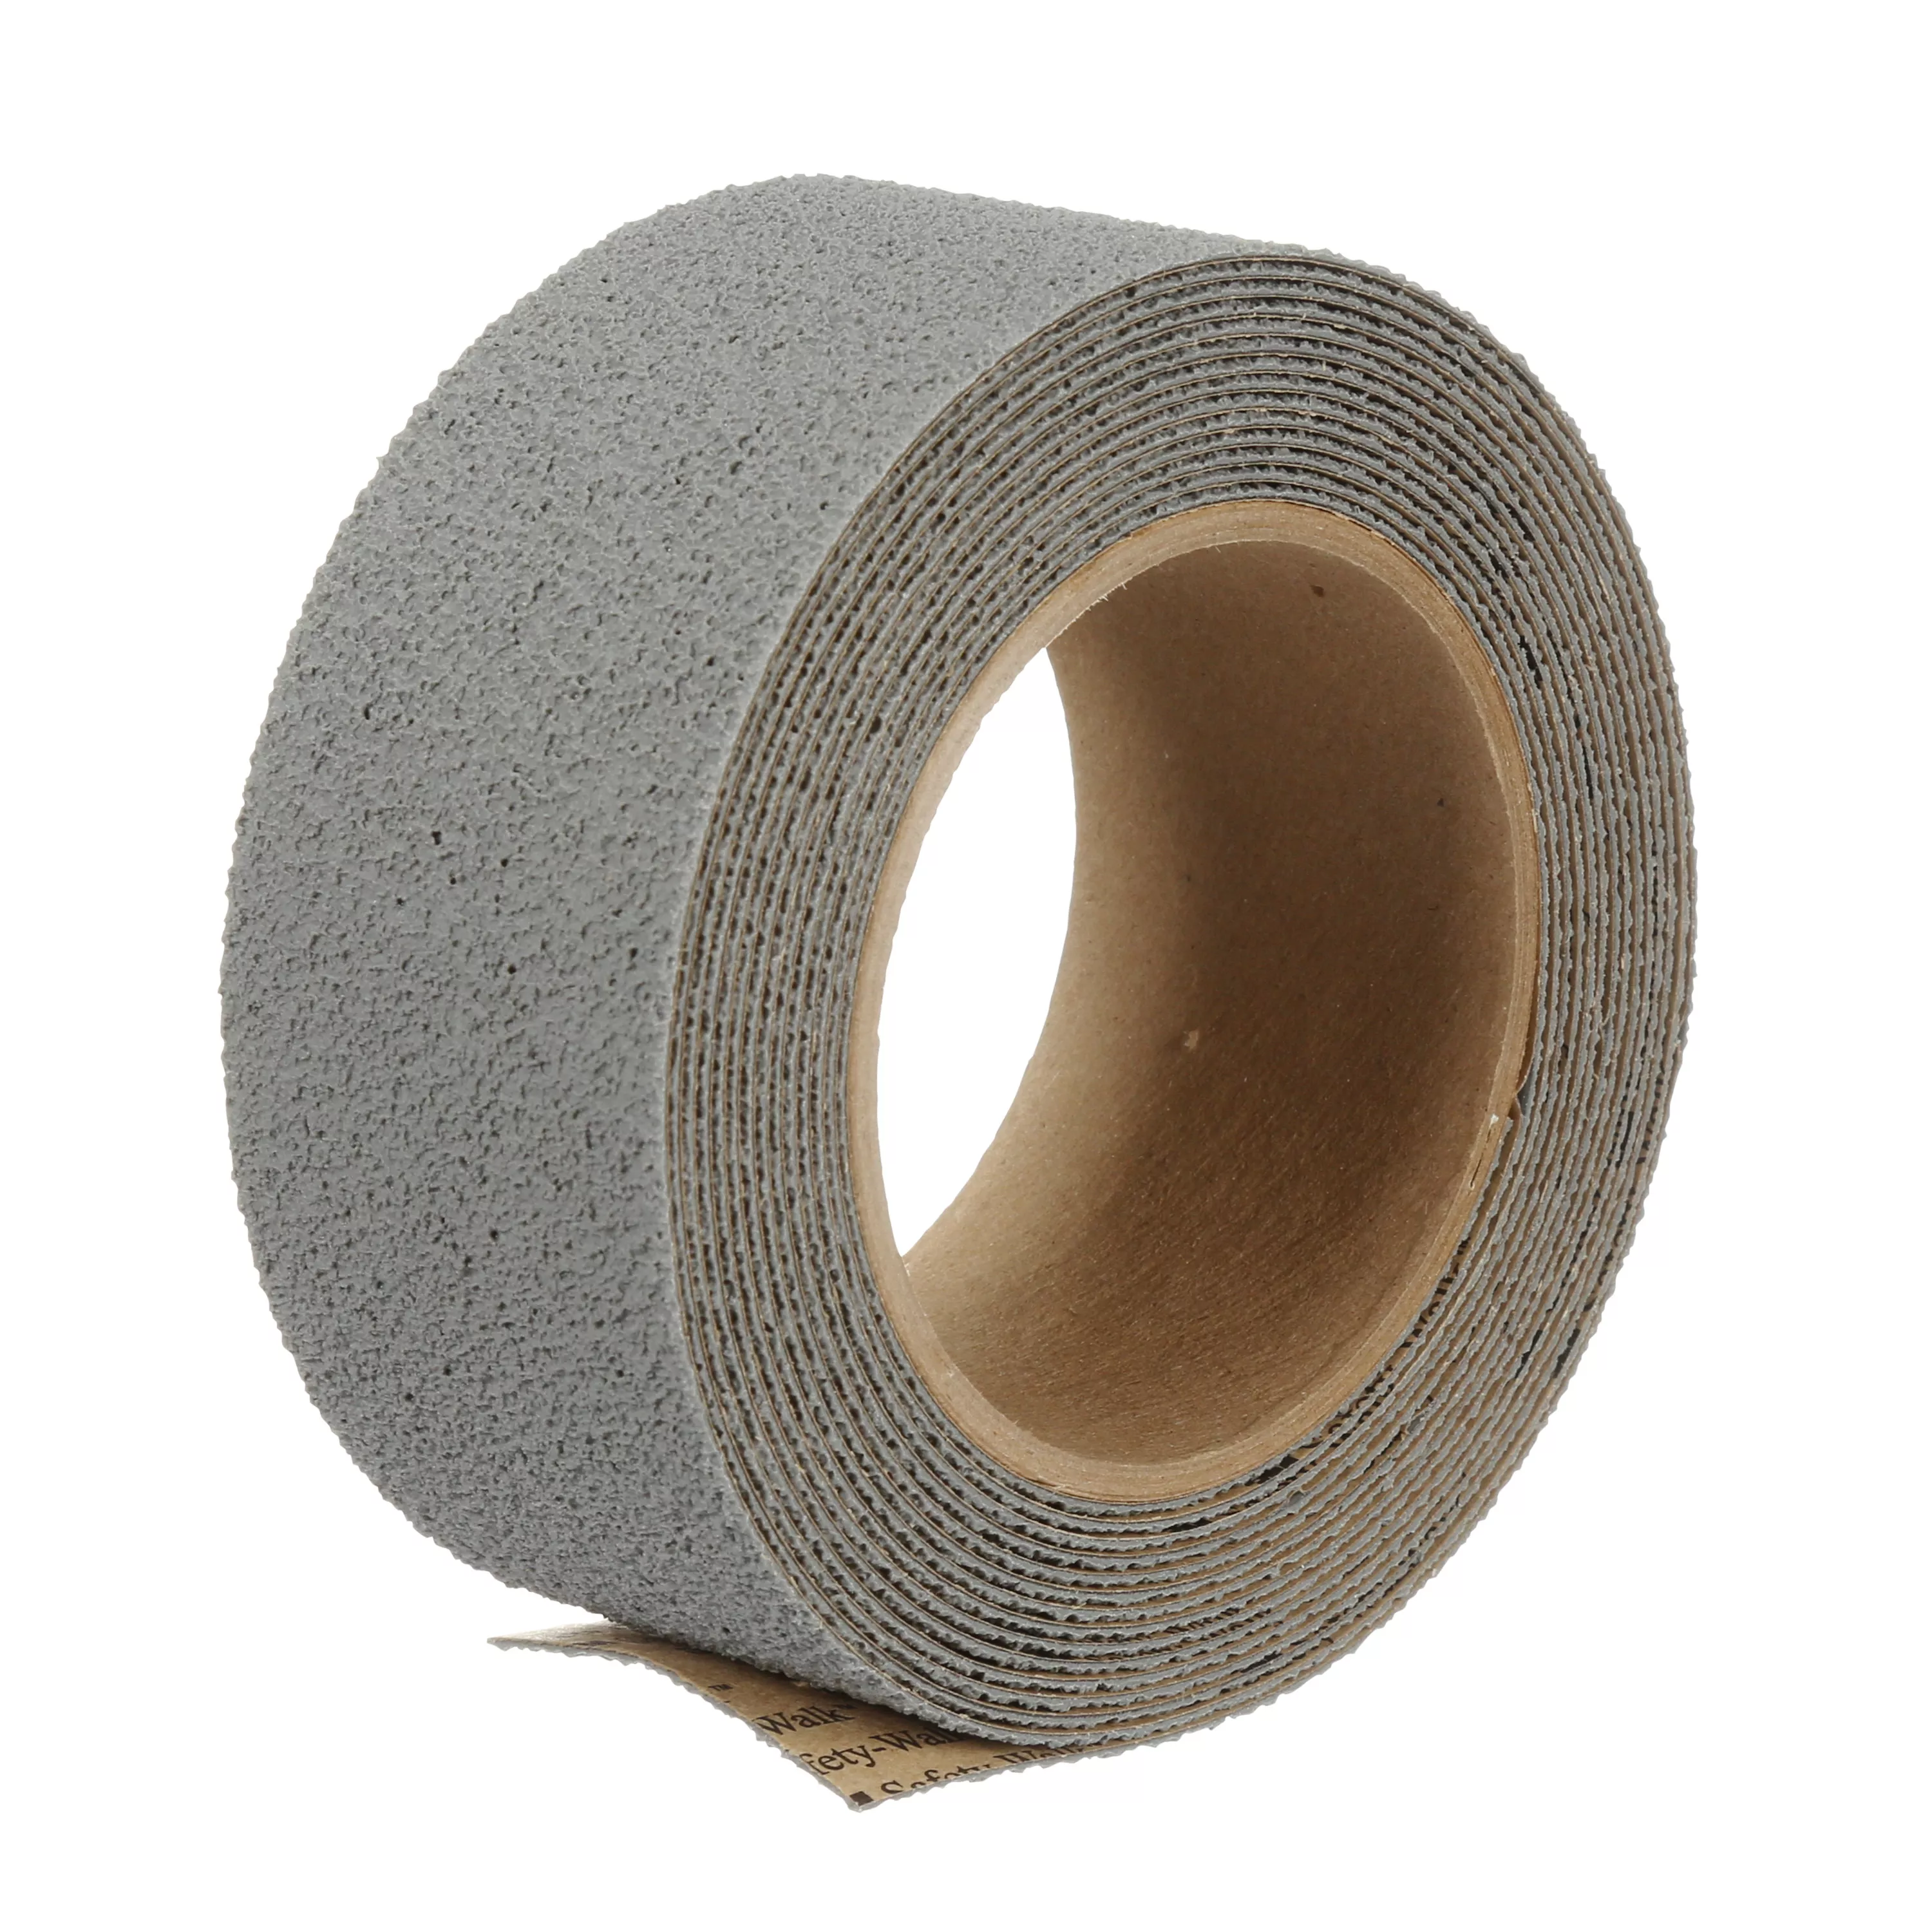 Product Number 370G-R2X180 | 3M™ Safety-Walk™ Slip Resistant Tape 370G-R2X180